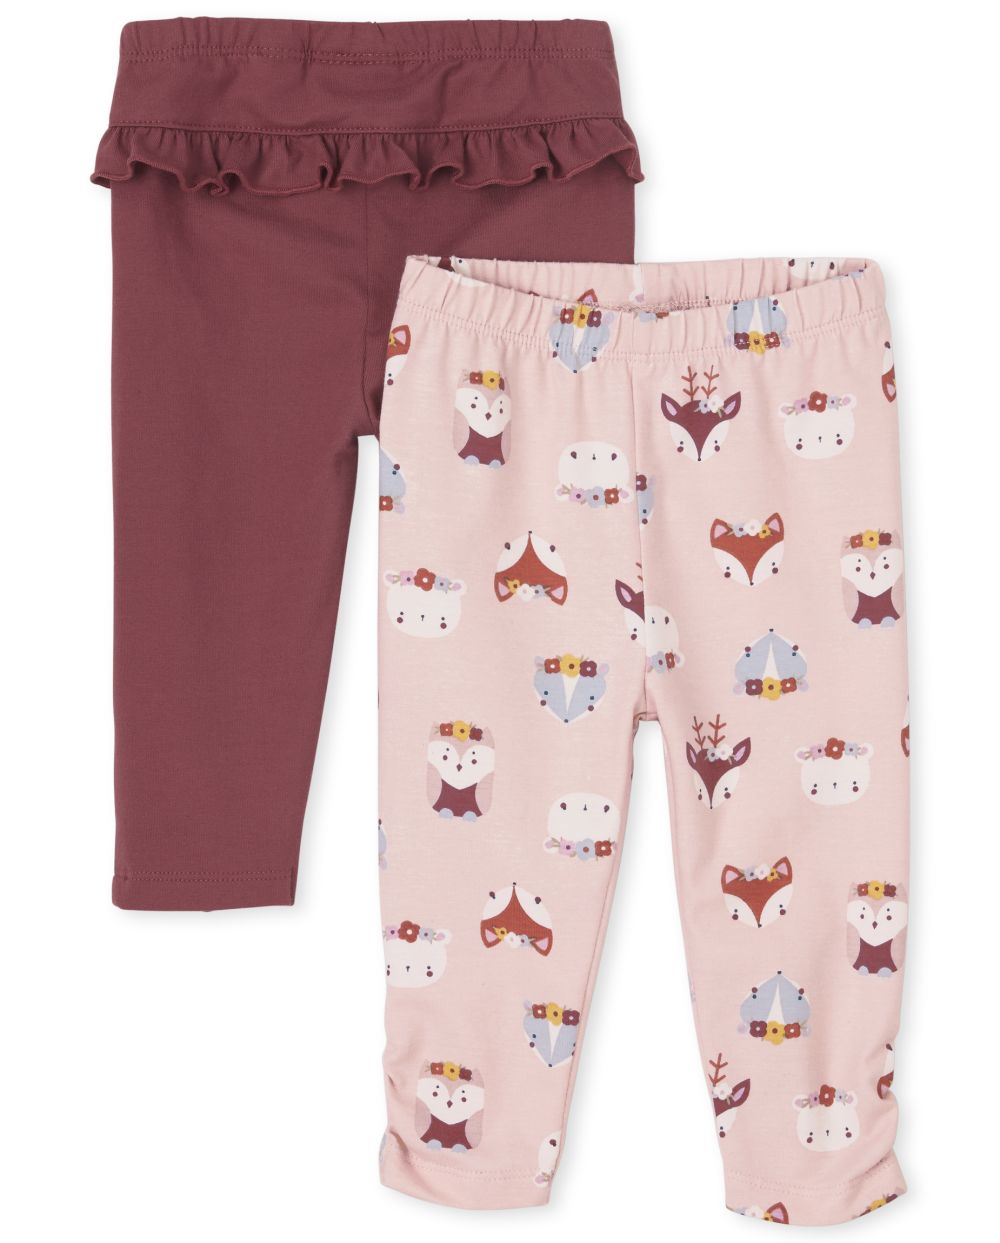 

Newborn Baby Owl Ruffle Pants 2-Pack - Pink - The Children's Place